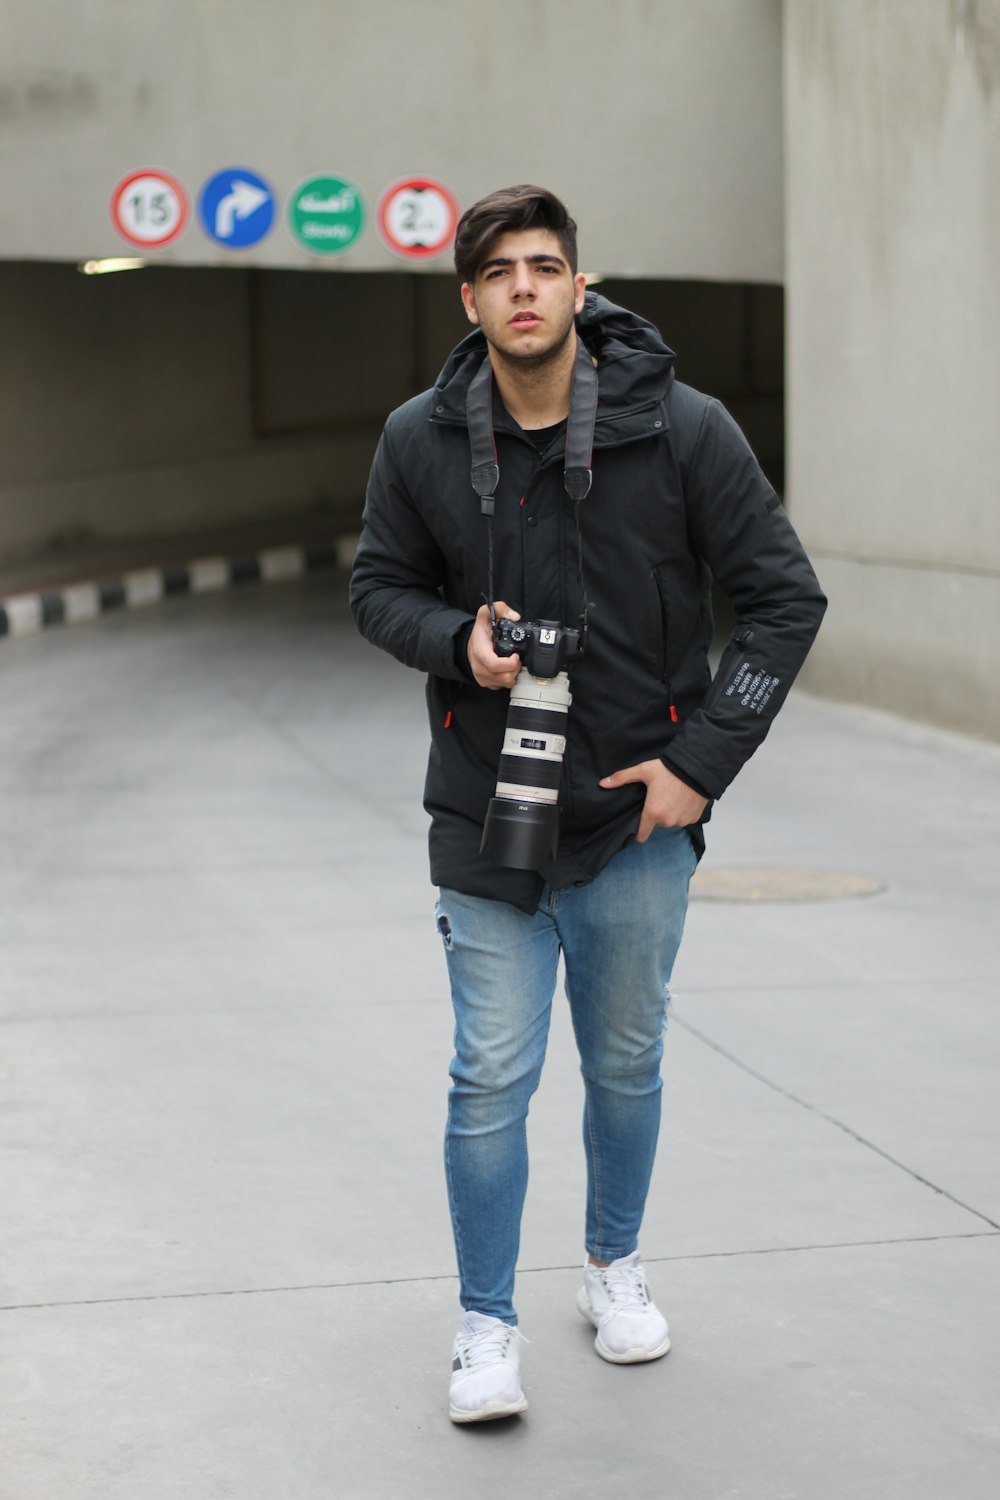 a man in a black jacket is holding a camera